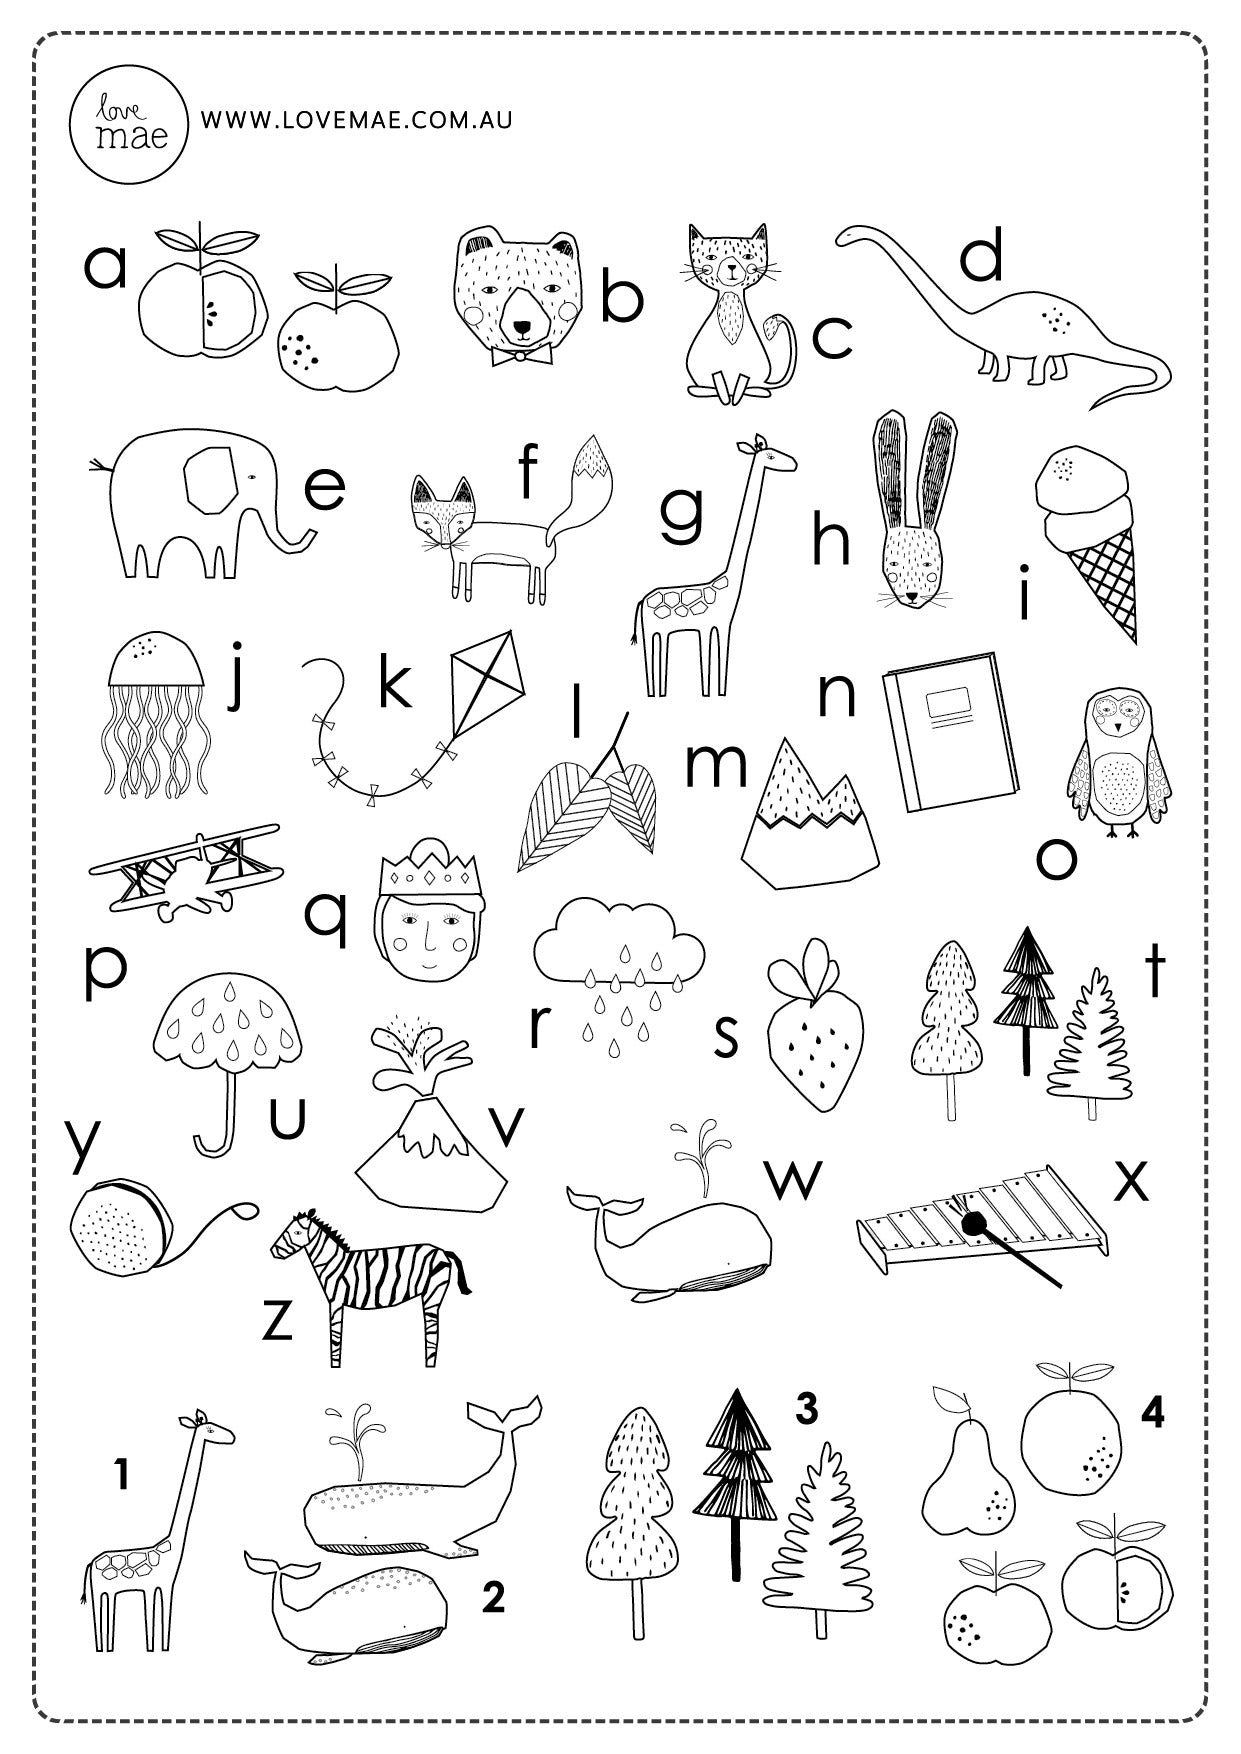 ABC_Alphabet_Kids_Illustration_Download_For_Kids_Colouring_In